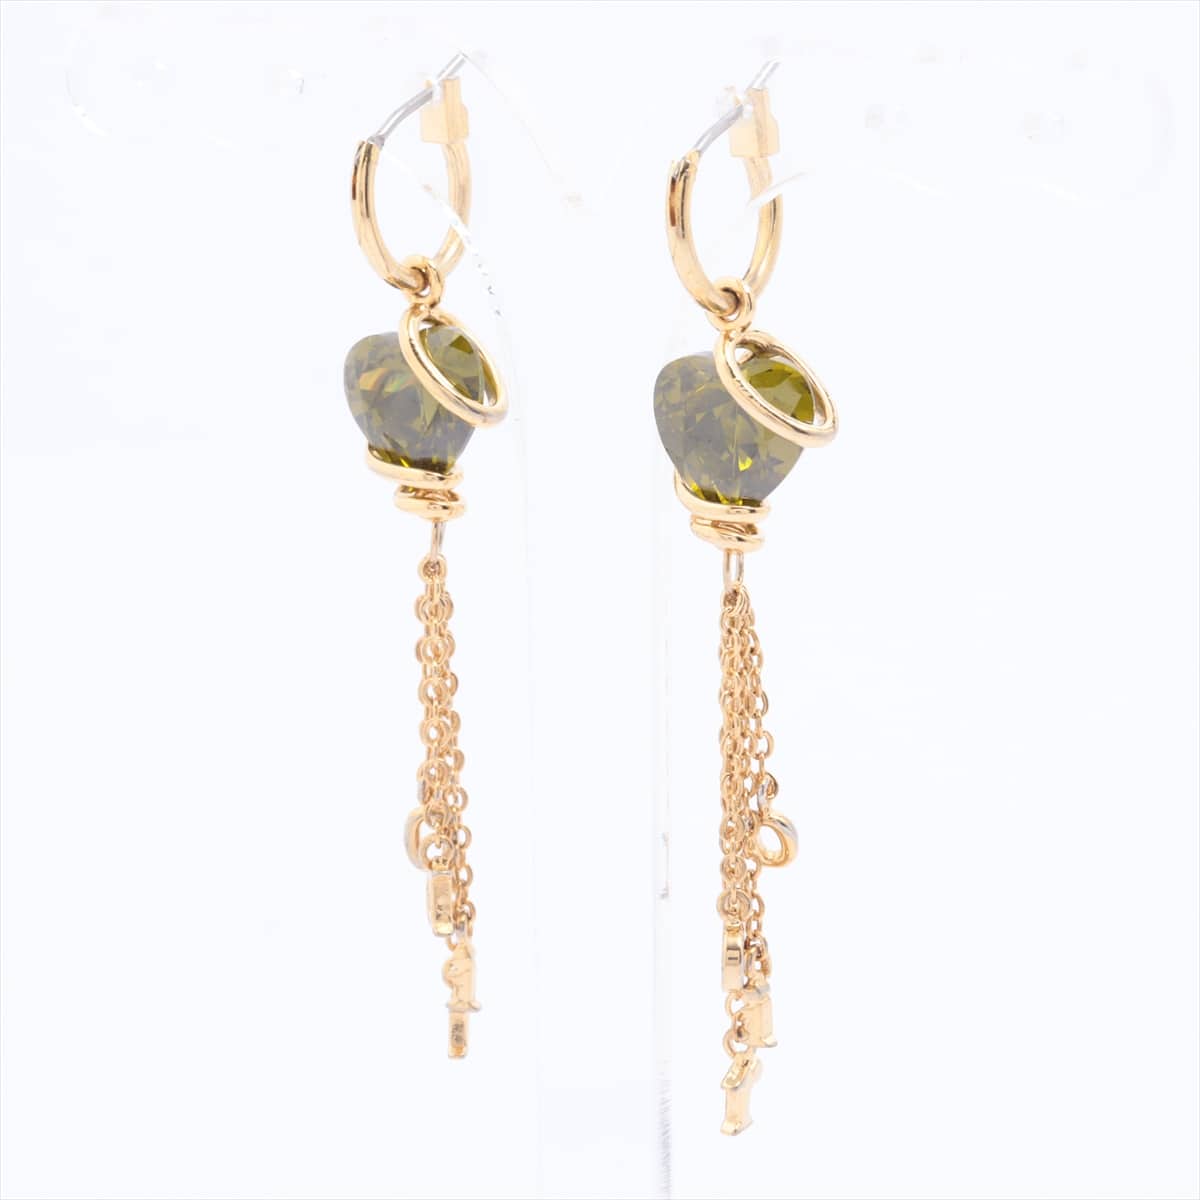 Christian Dior Piercing jewelry (for both ears) GP Gold Peridot